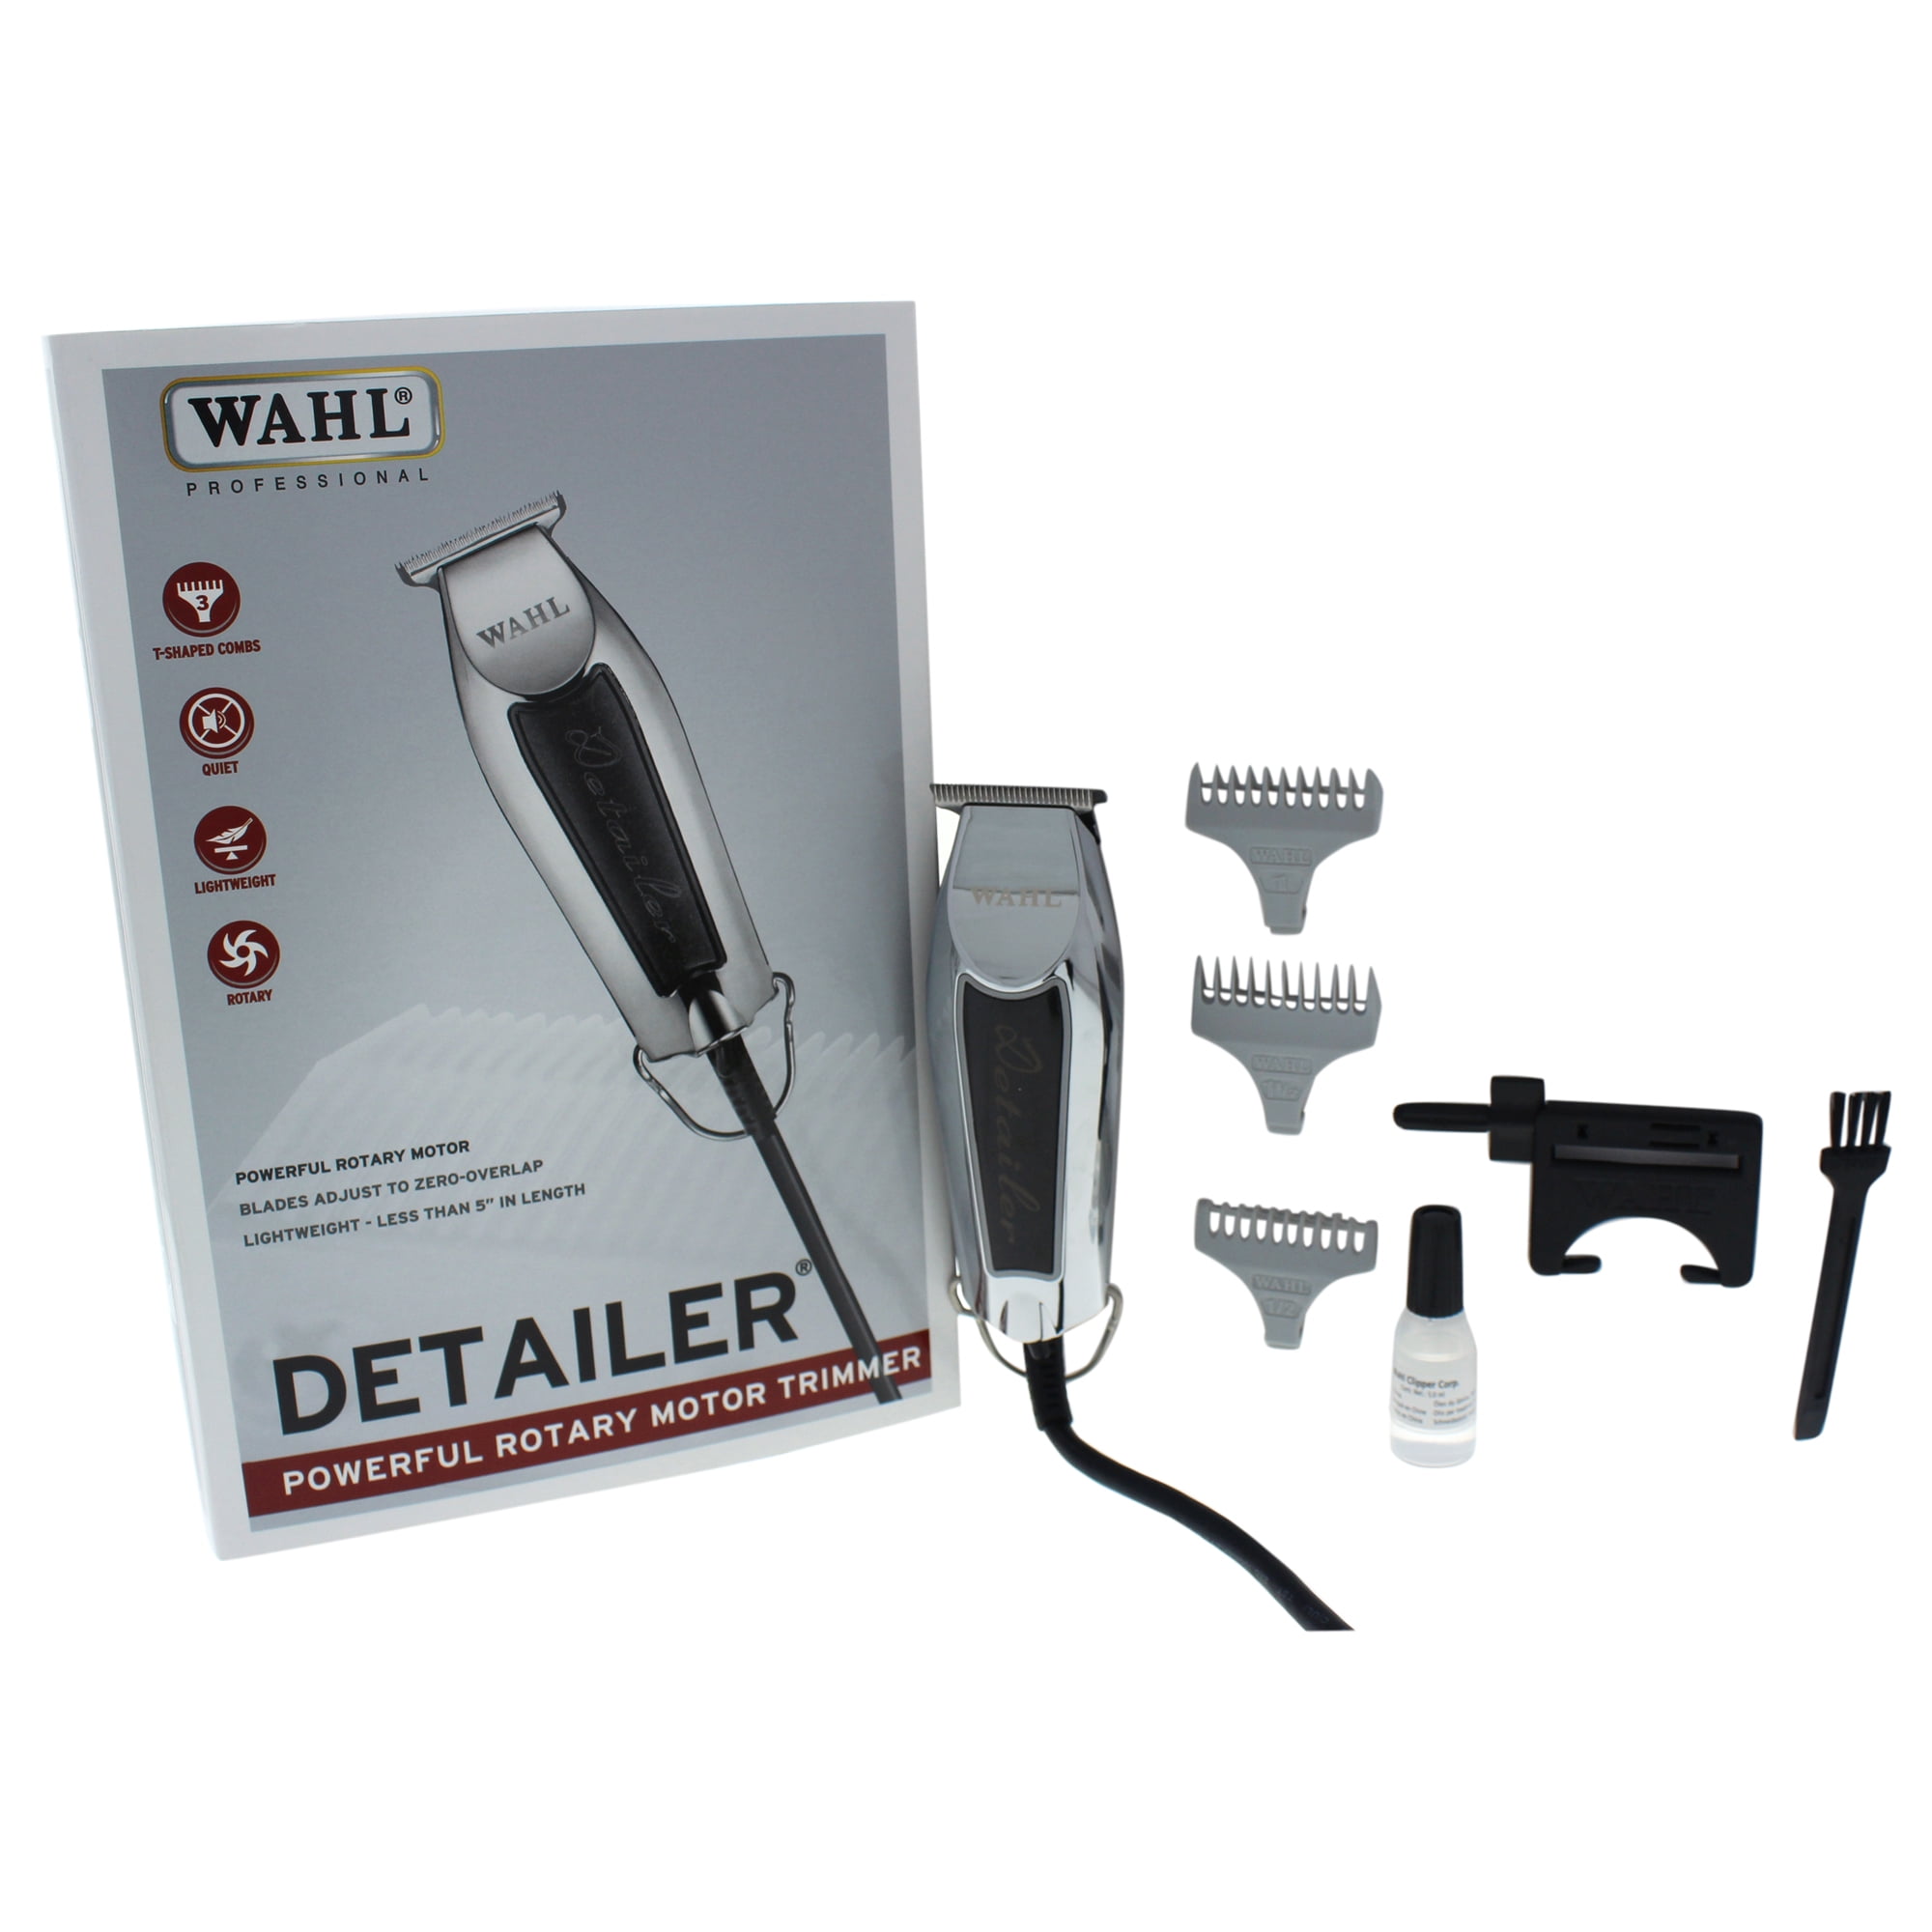 Wahl Detailer Trimmer T-Wide 38mm  WAHL.Shop -  is nr. 1 in  professional clippers, trimmers and accessories.